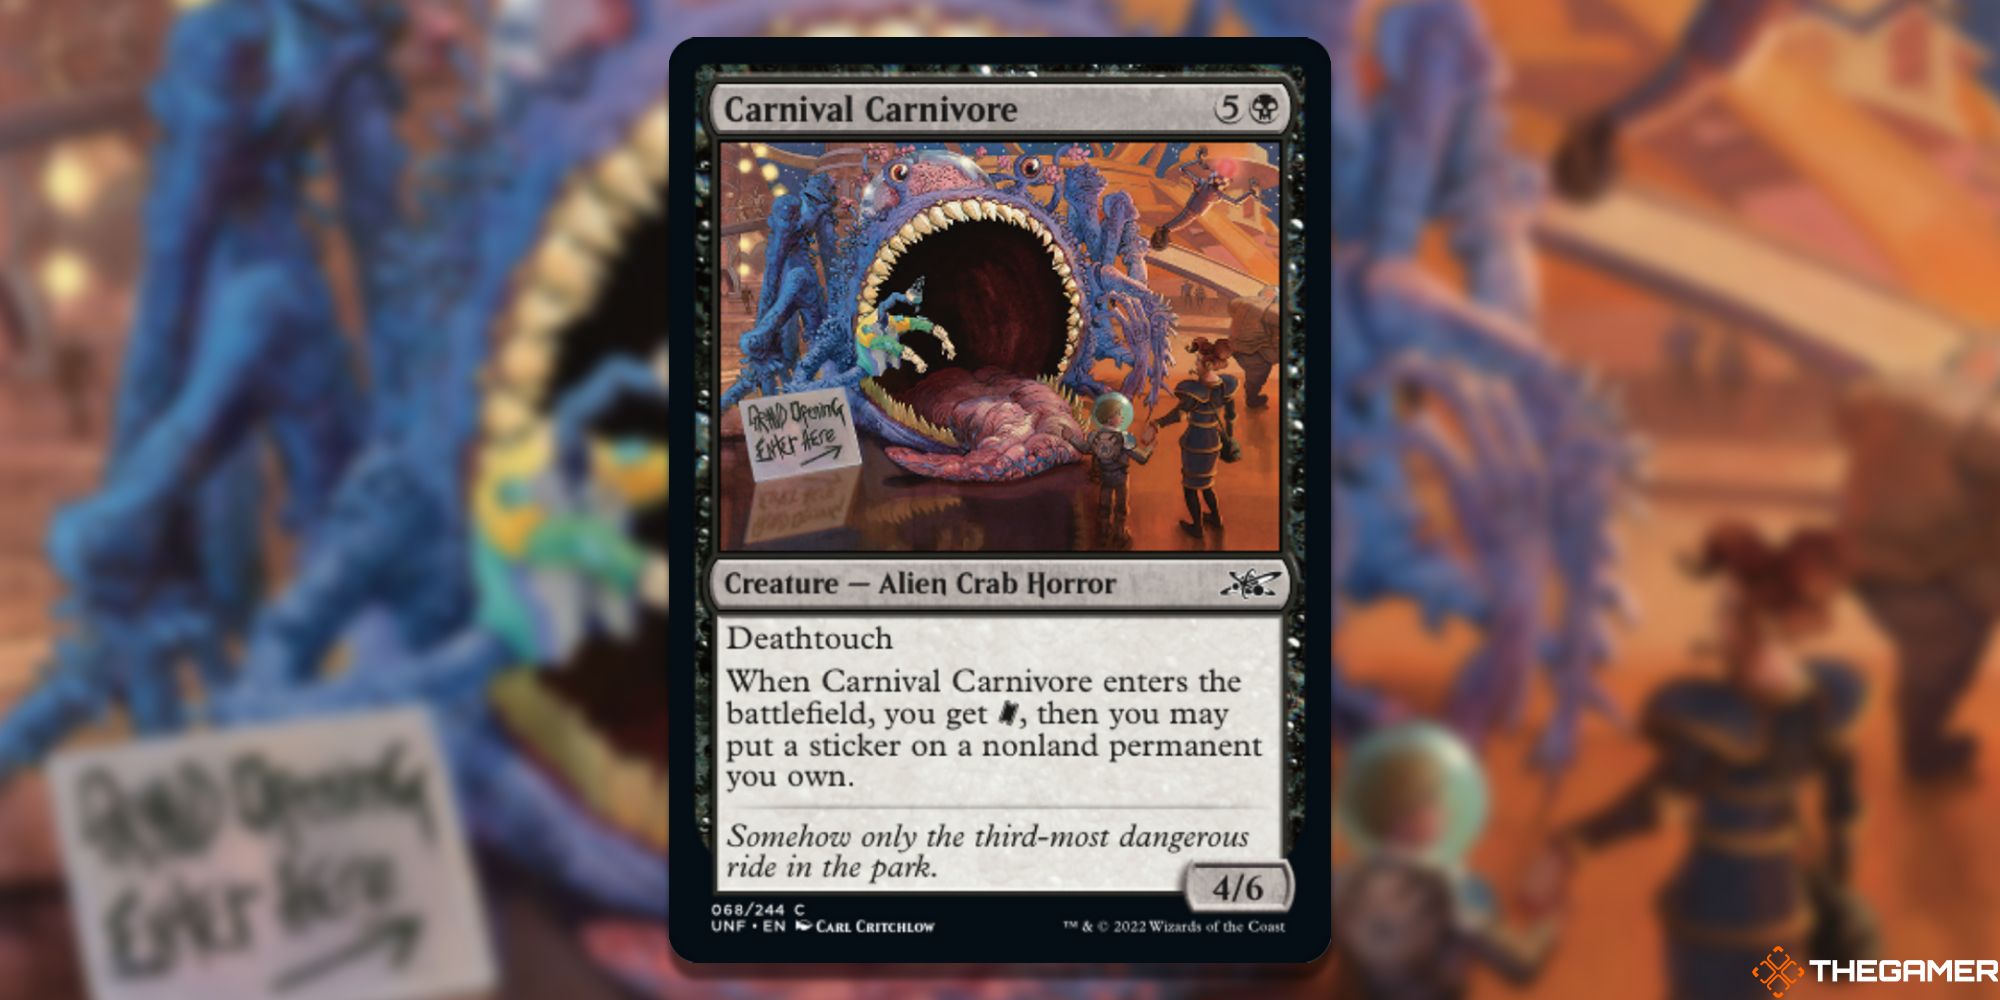 The card Carnival Carnivore from Magic: the Gathering.